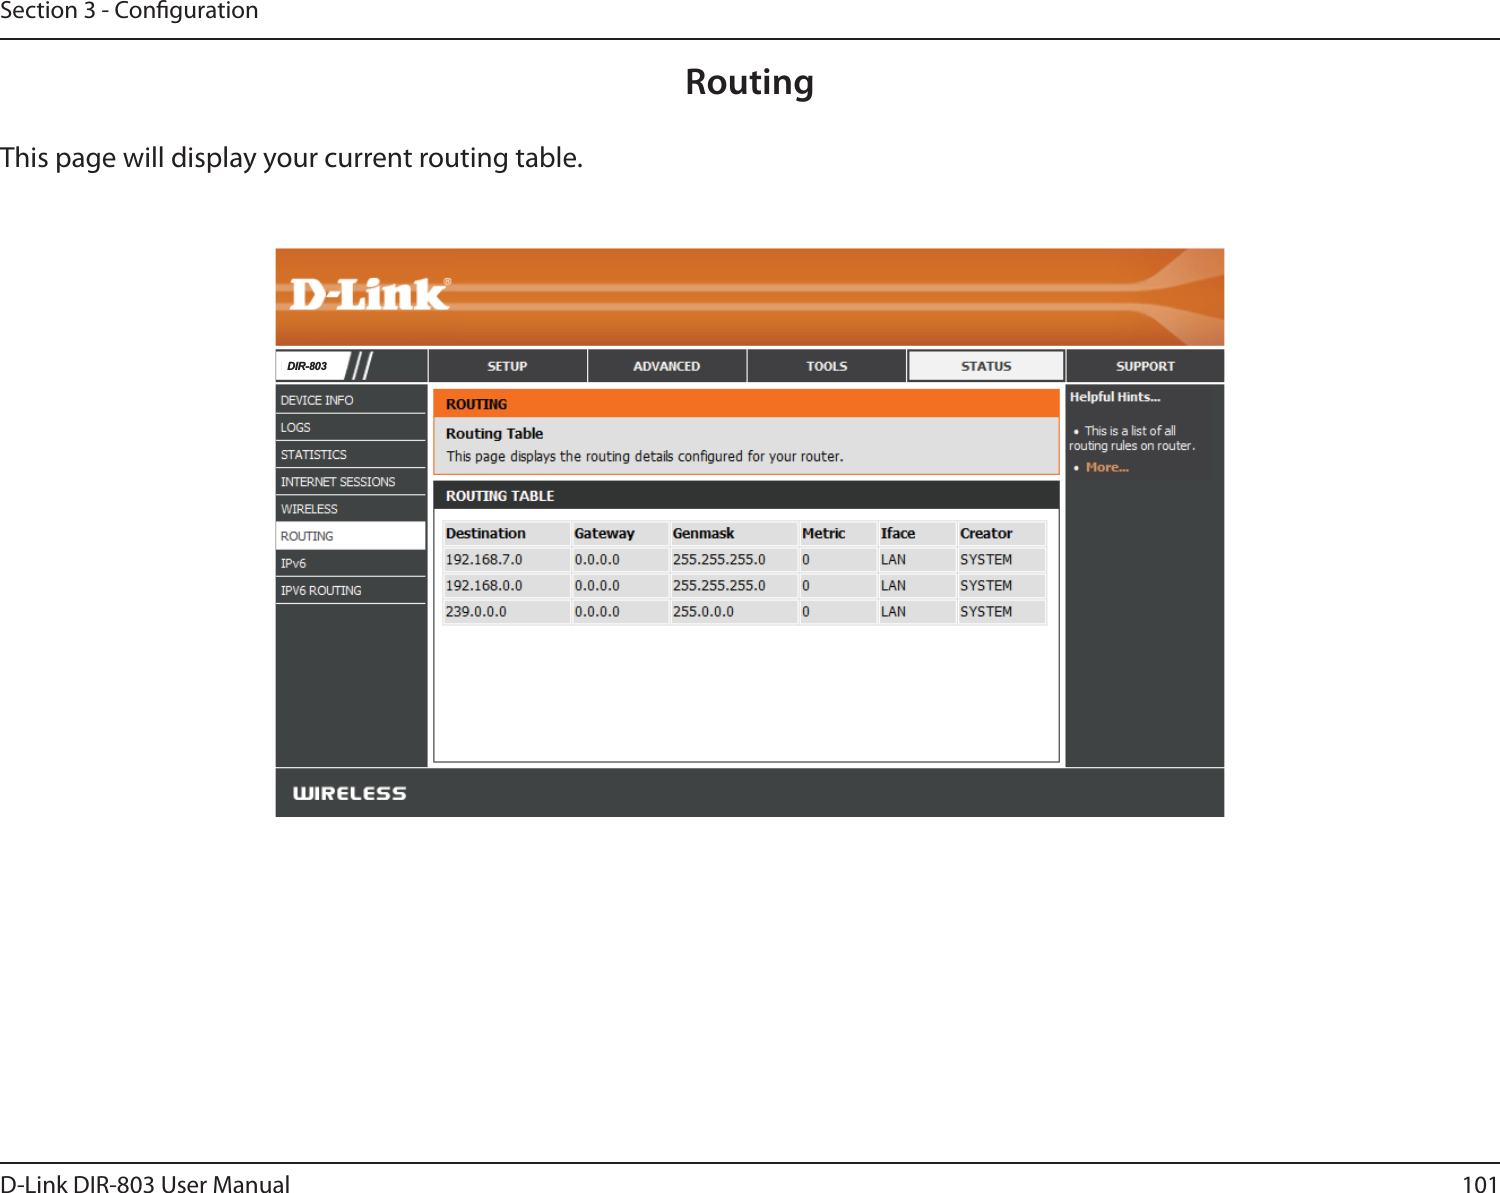 101D-Link DIR-803 User ManualSection 3 - CongurationRoutingThis page will display your current routing table.&apos;,5